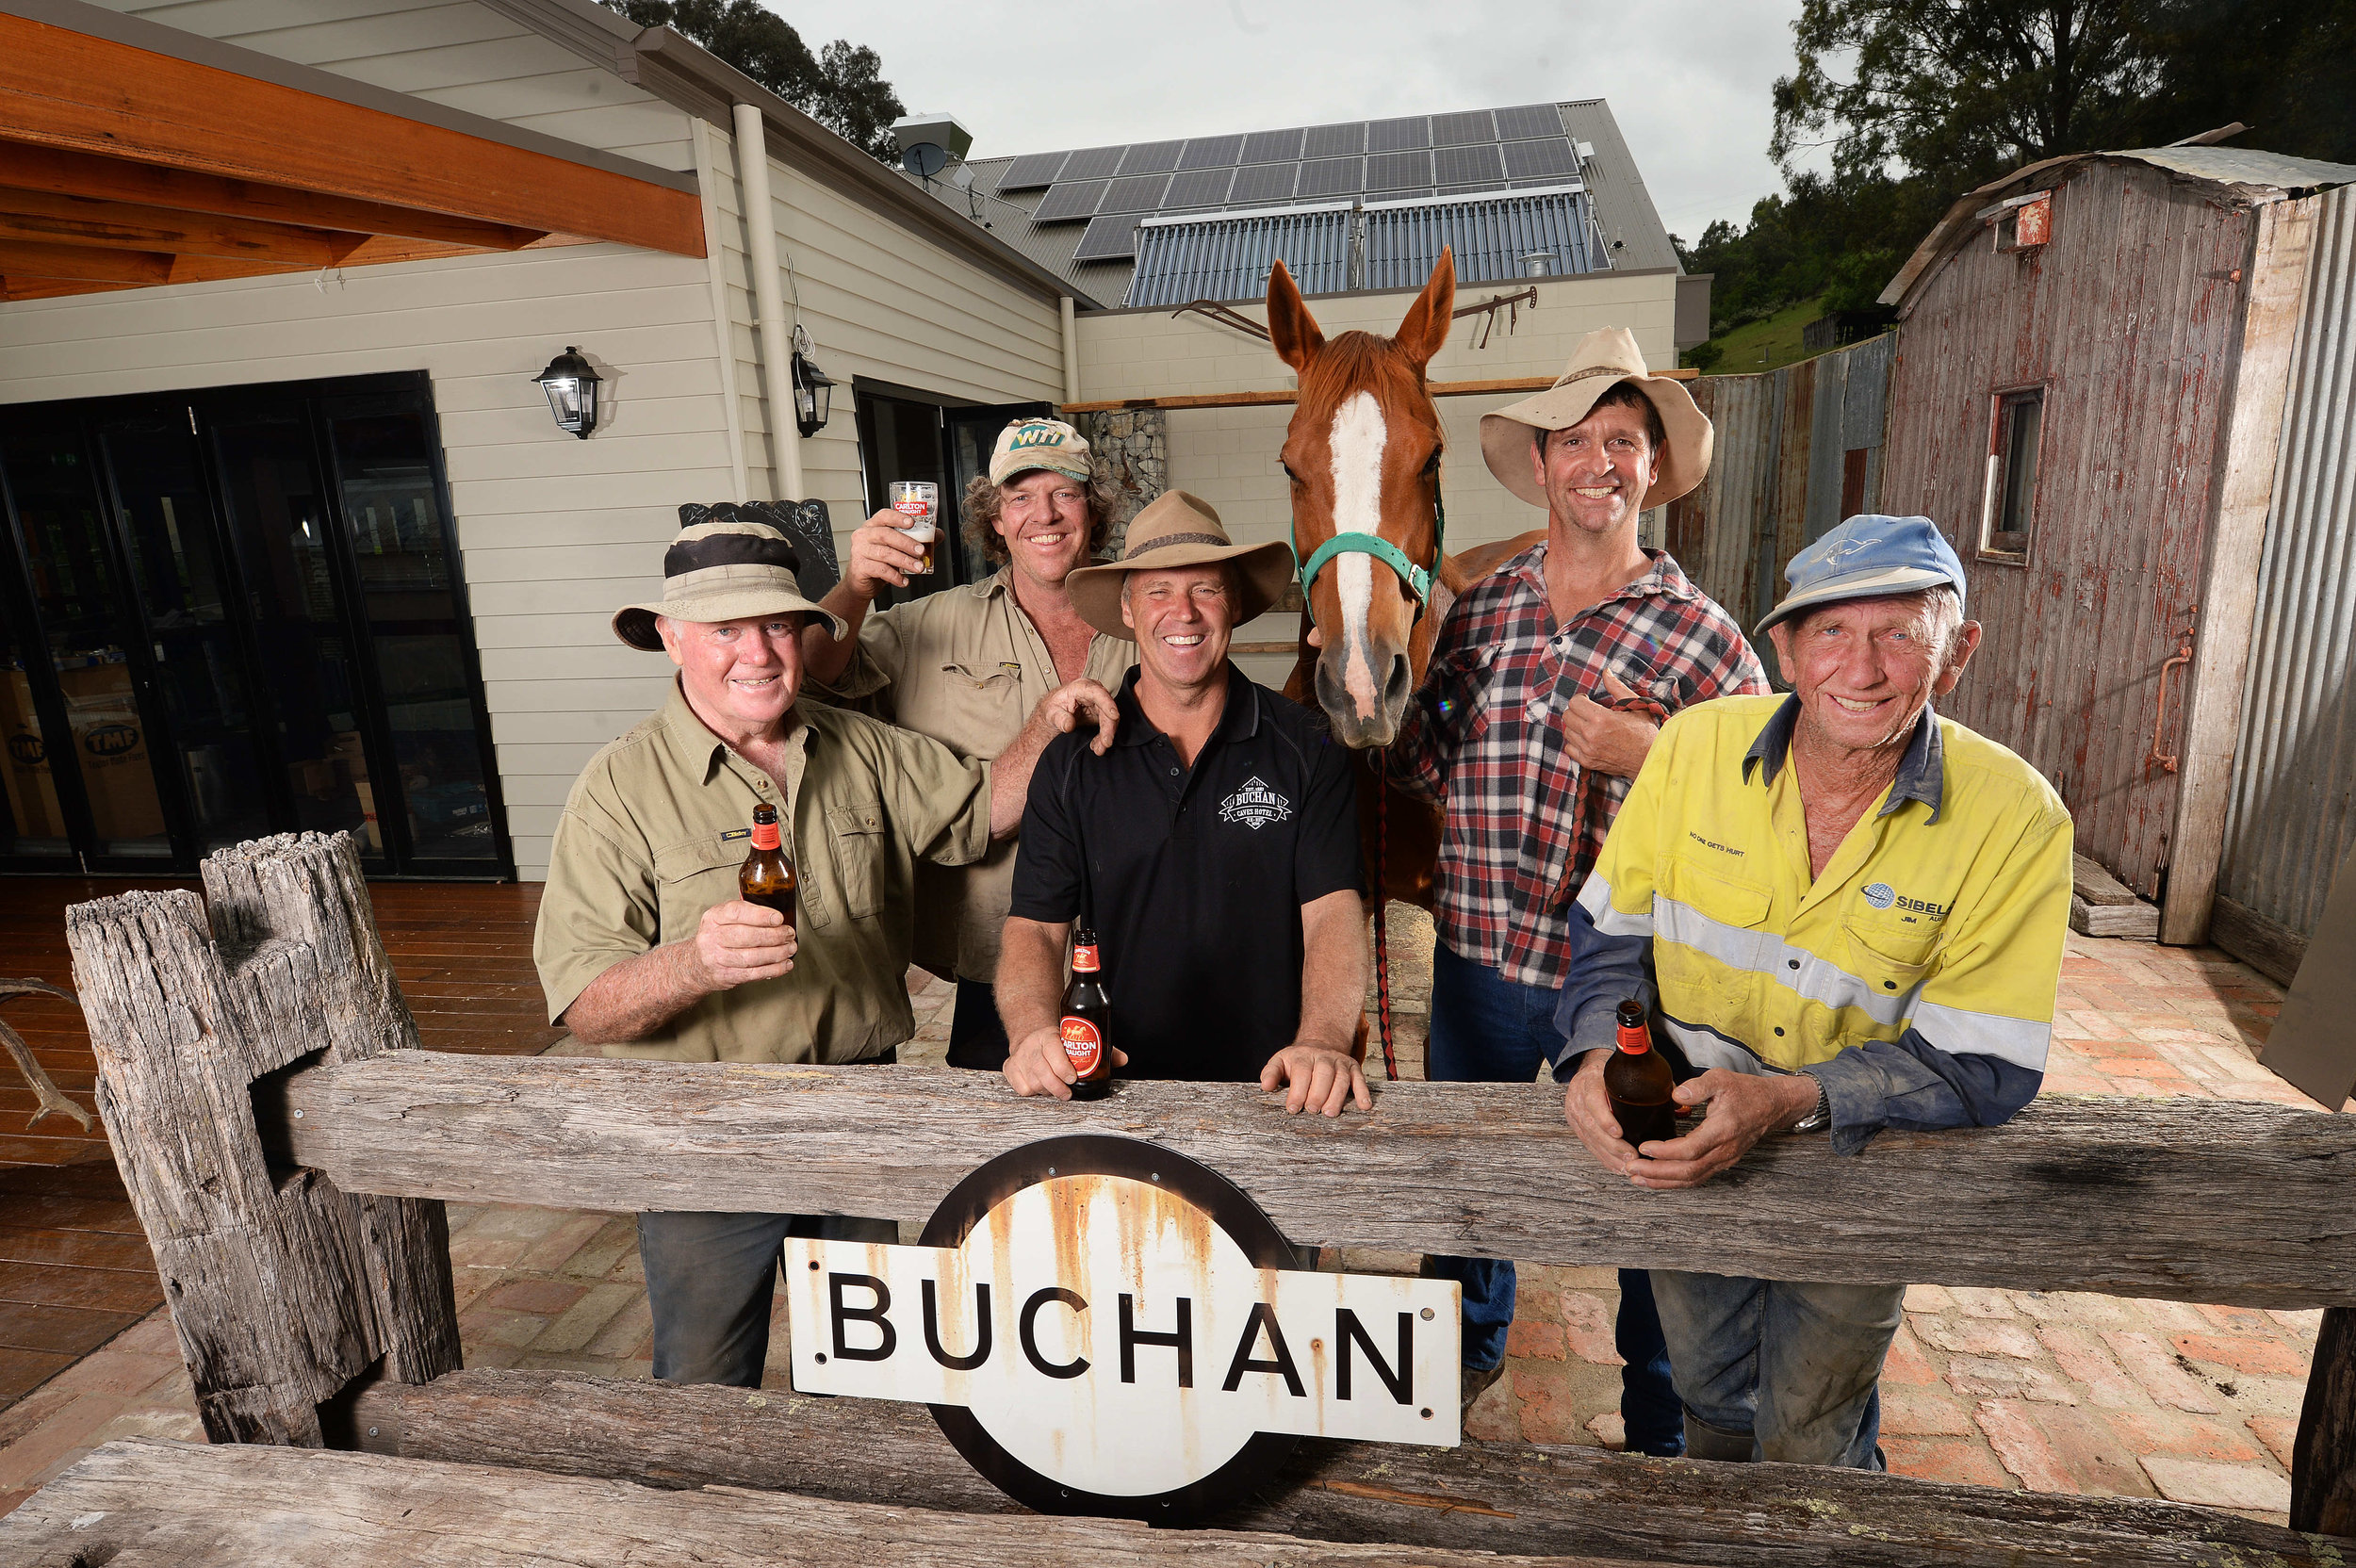 CHP_Export_148296239_Locals get ready for the opening next Friday of the  Buchan Pub   after bur.jpg